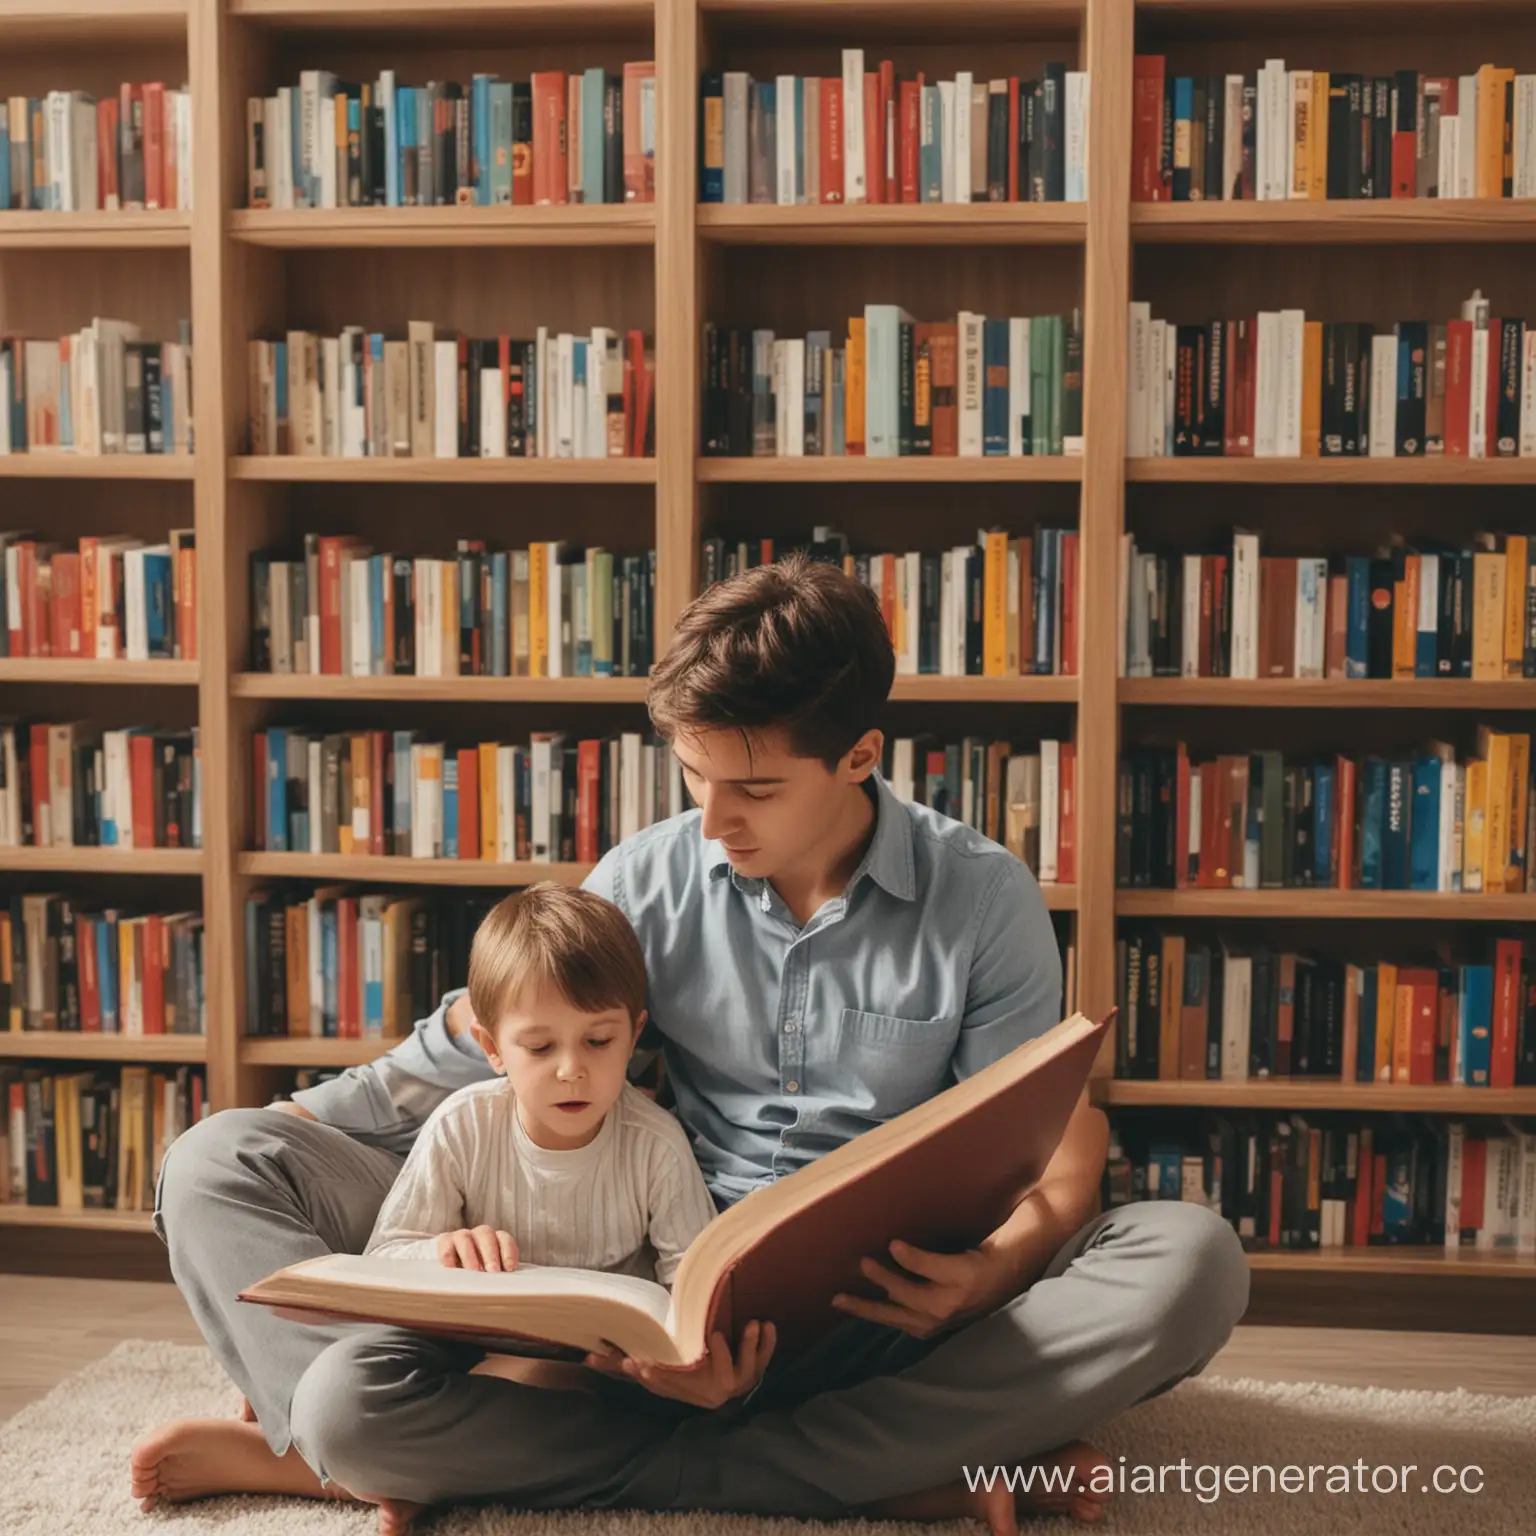 a boy is reading a book with his mother, there are a lot of books in the bookcase behind them